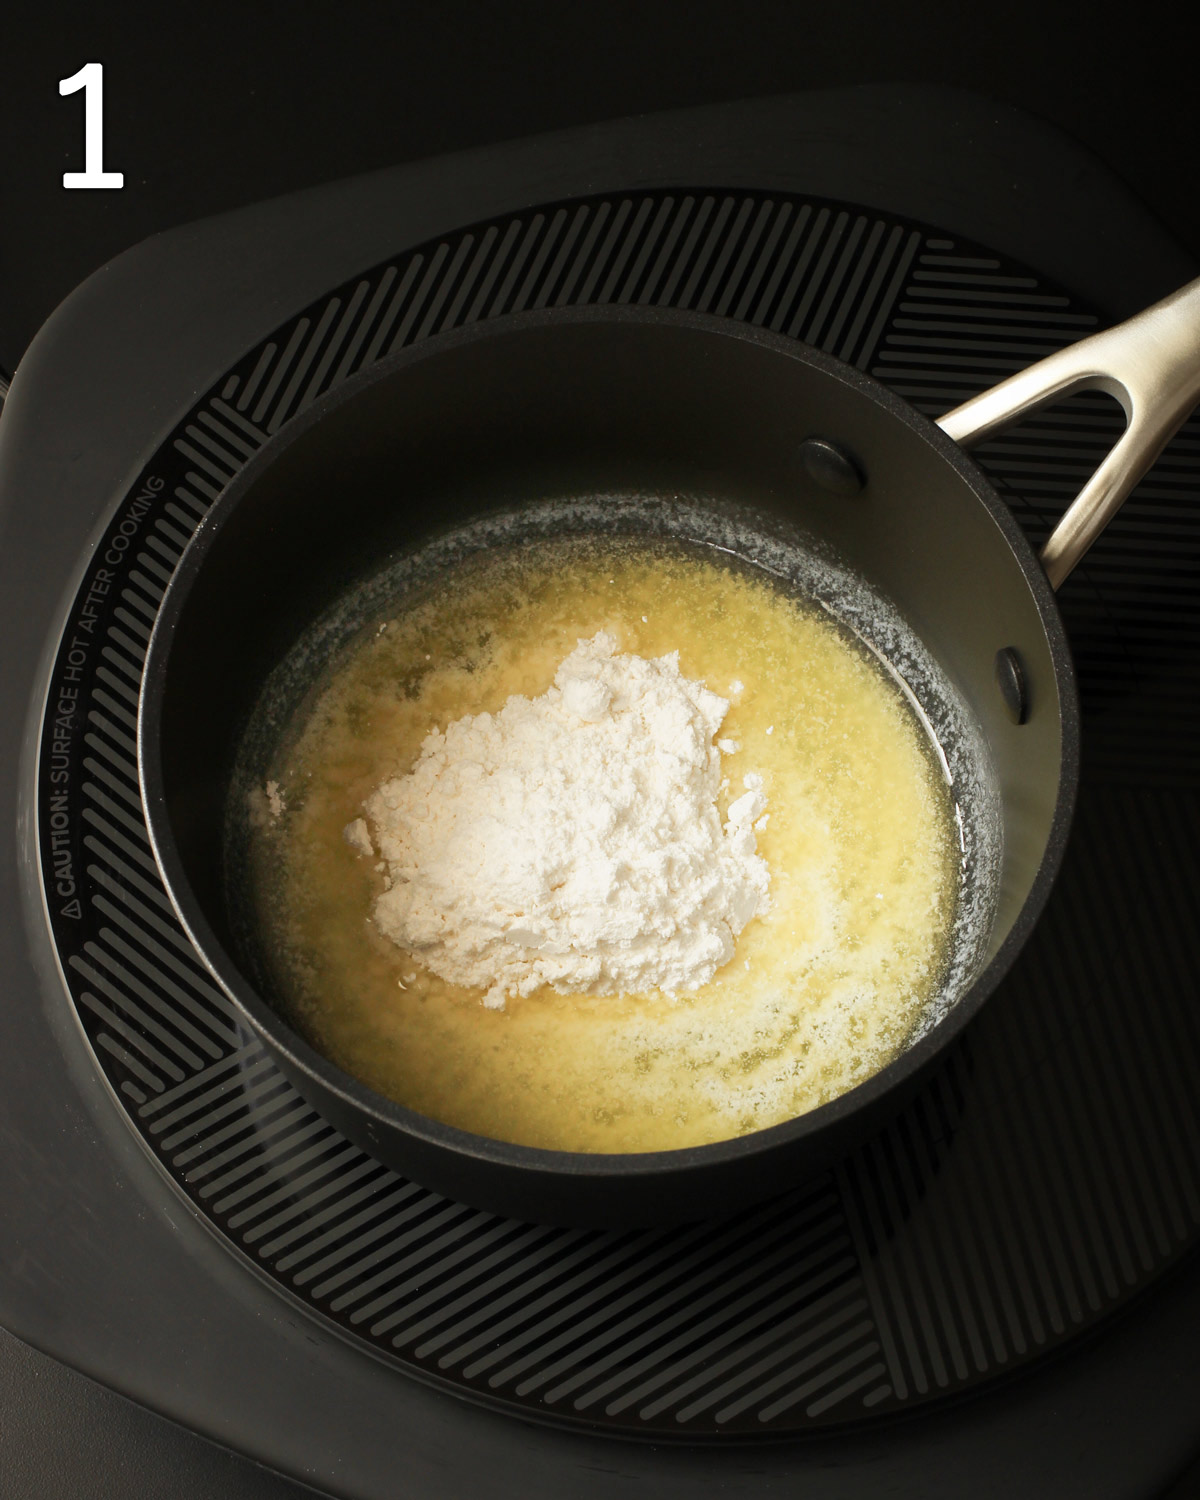 mixing flour and butter for a roux in a saucepan.